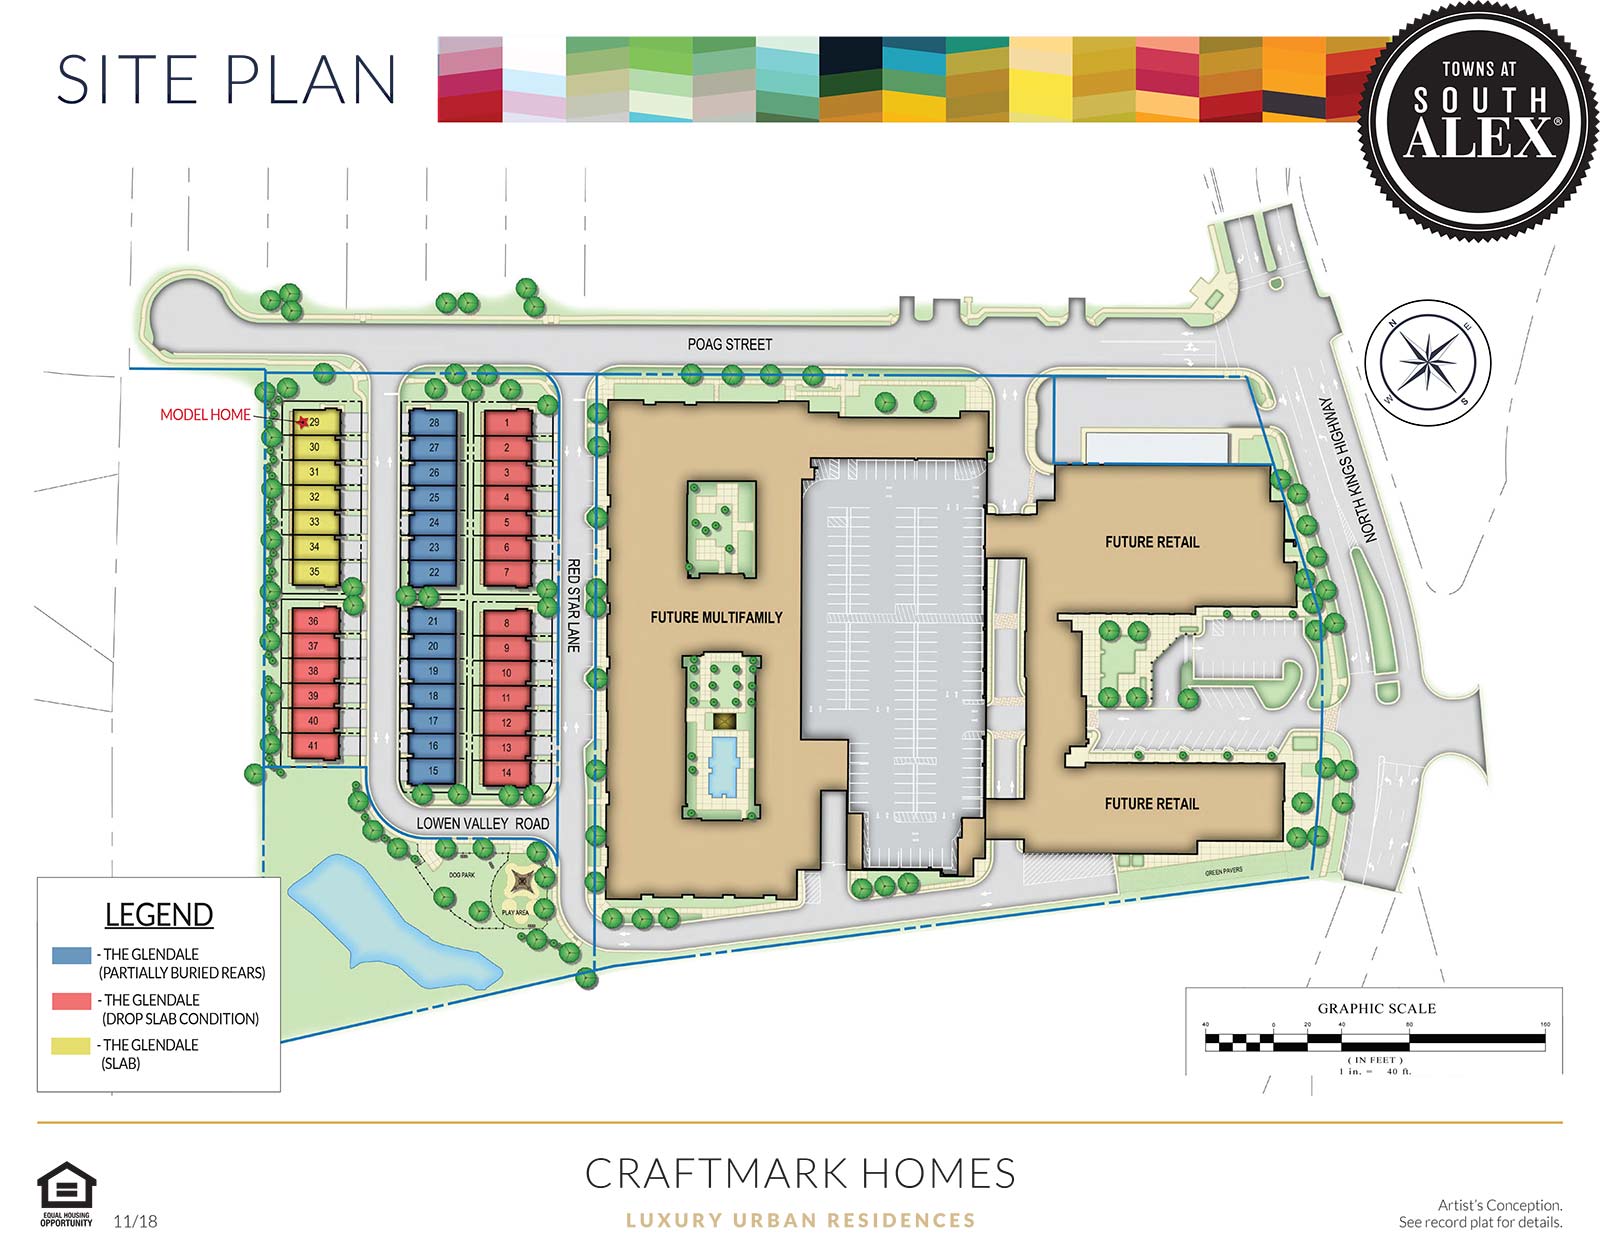 Towns at South Alex Site Plan, 4-Level Townhomes in Alexandria VA, Craftmark Homes